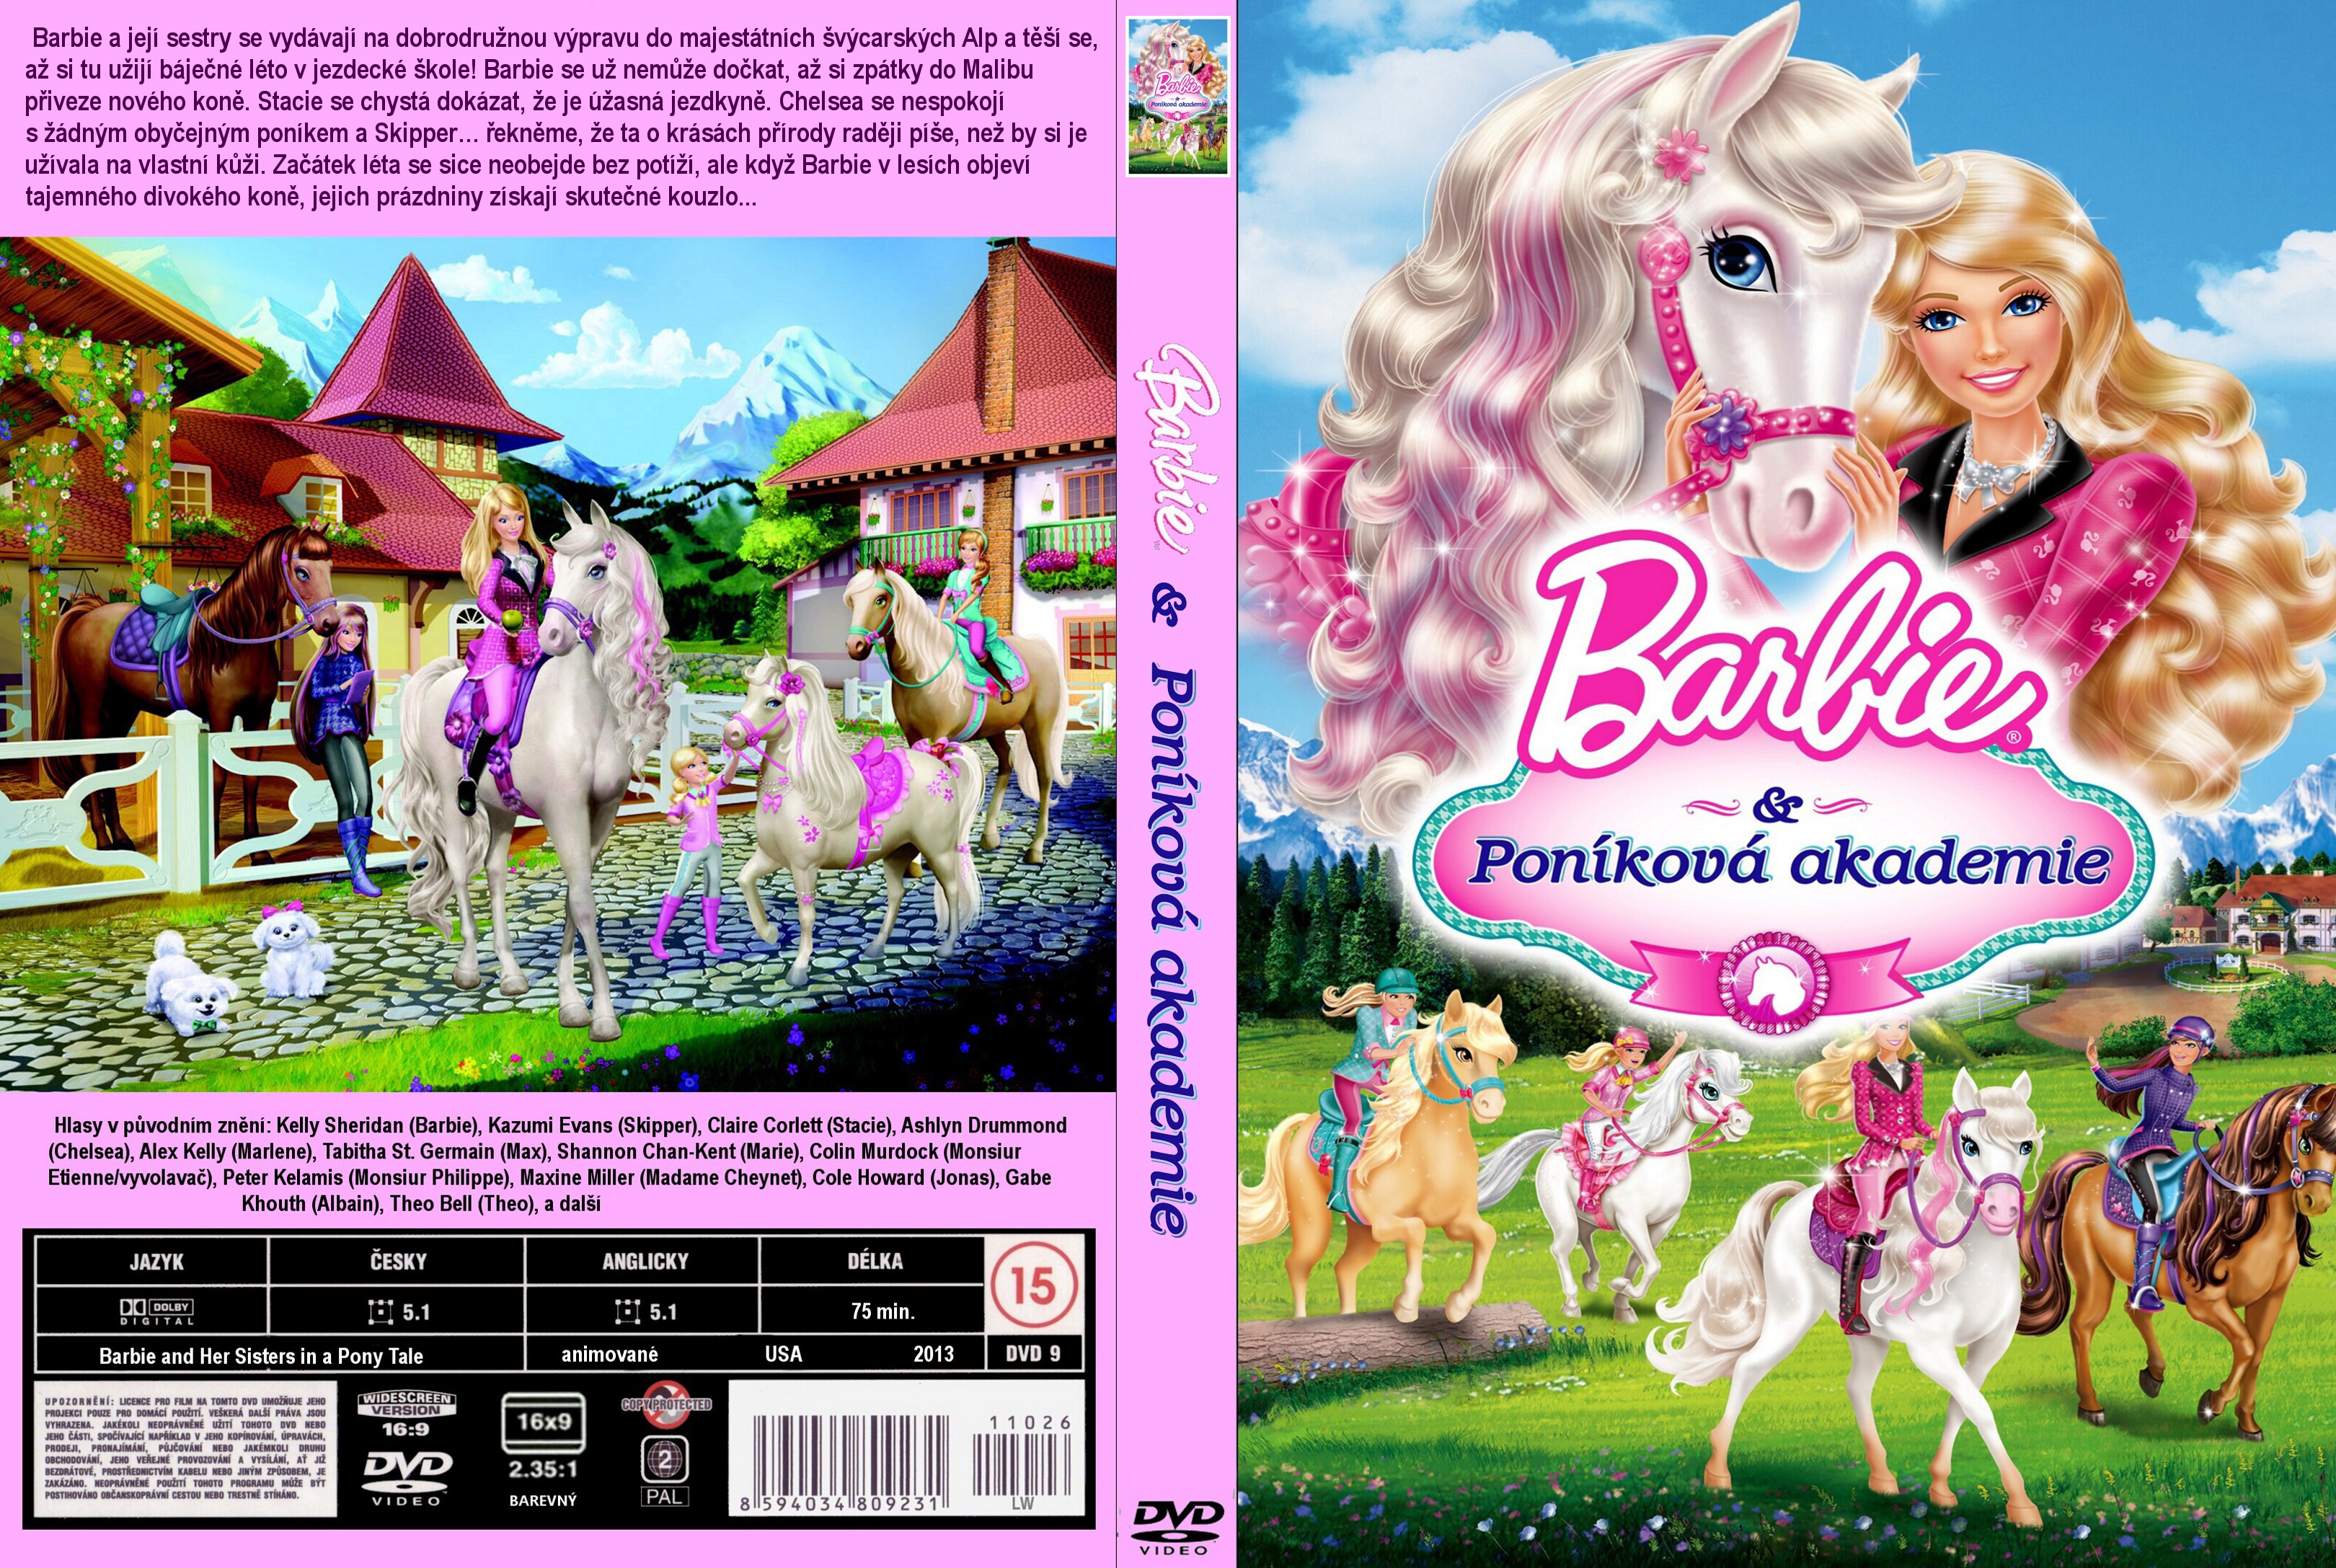 barbie in a pony tale full movie